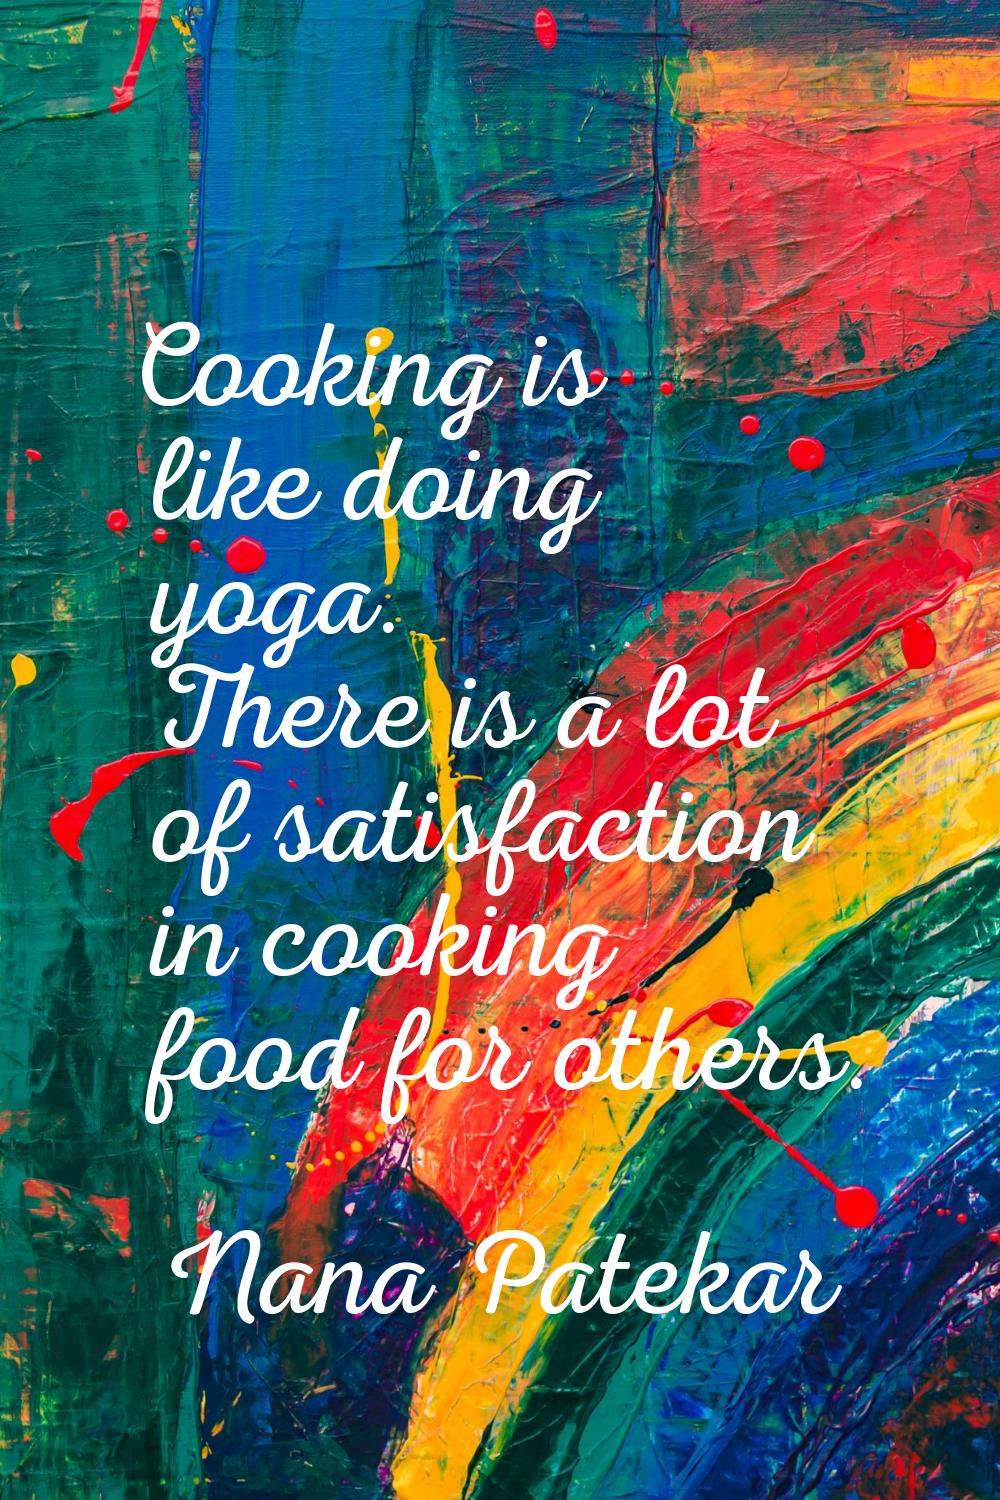 Cooking is like doing yoga. There is a lot of satisfaction in cooking food for others.